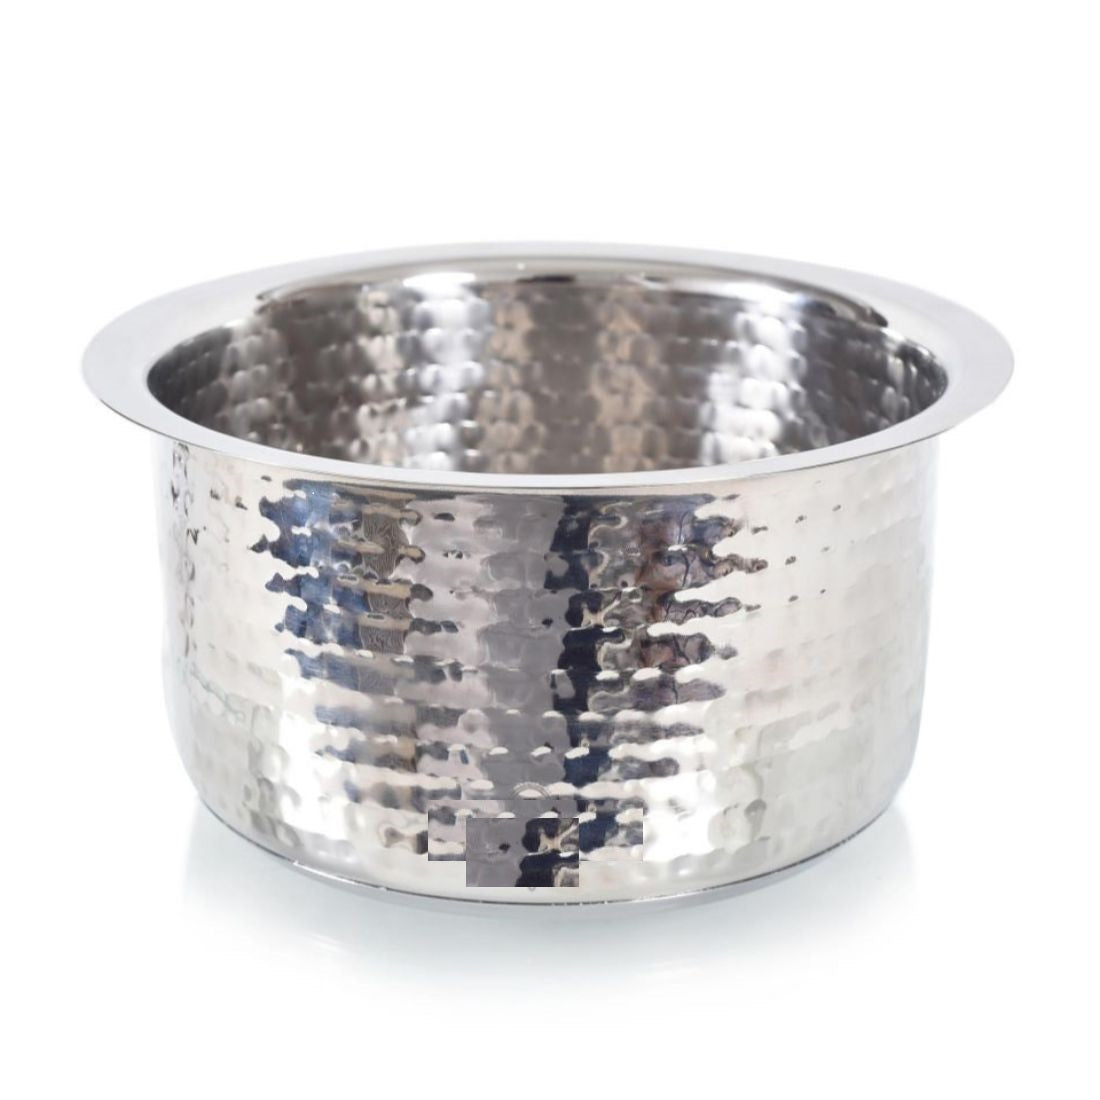 Aluminium Indian Hammered Deep Pot 3.3L with Lid No14 Round Heavy Duty 6253